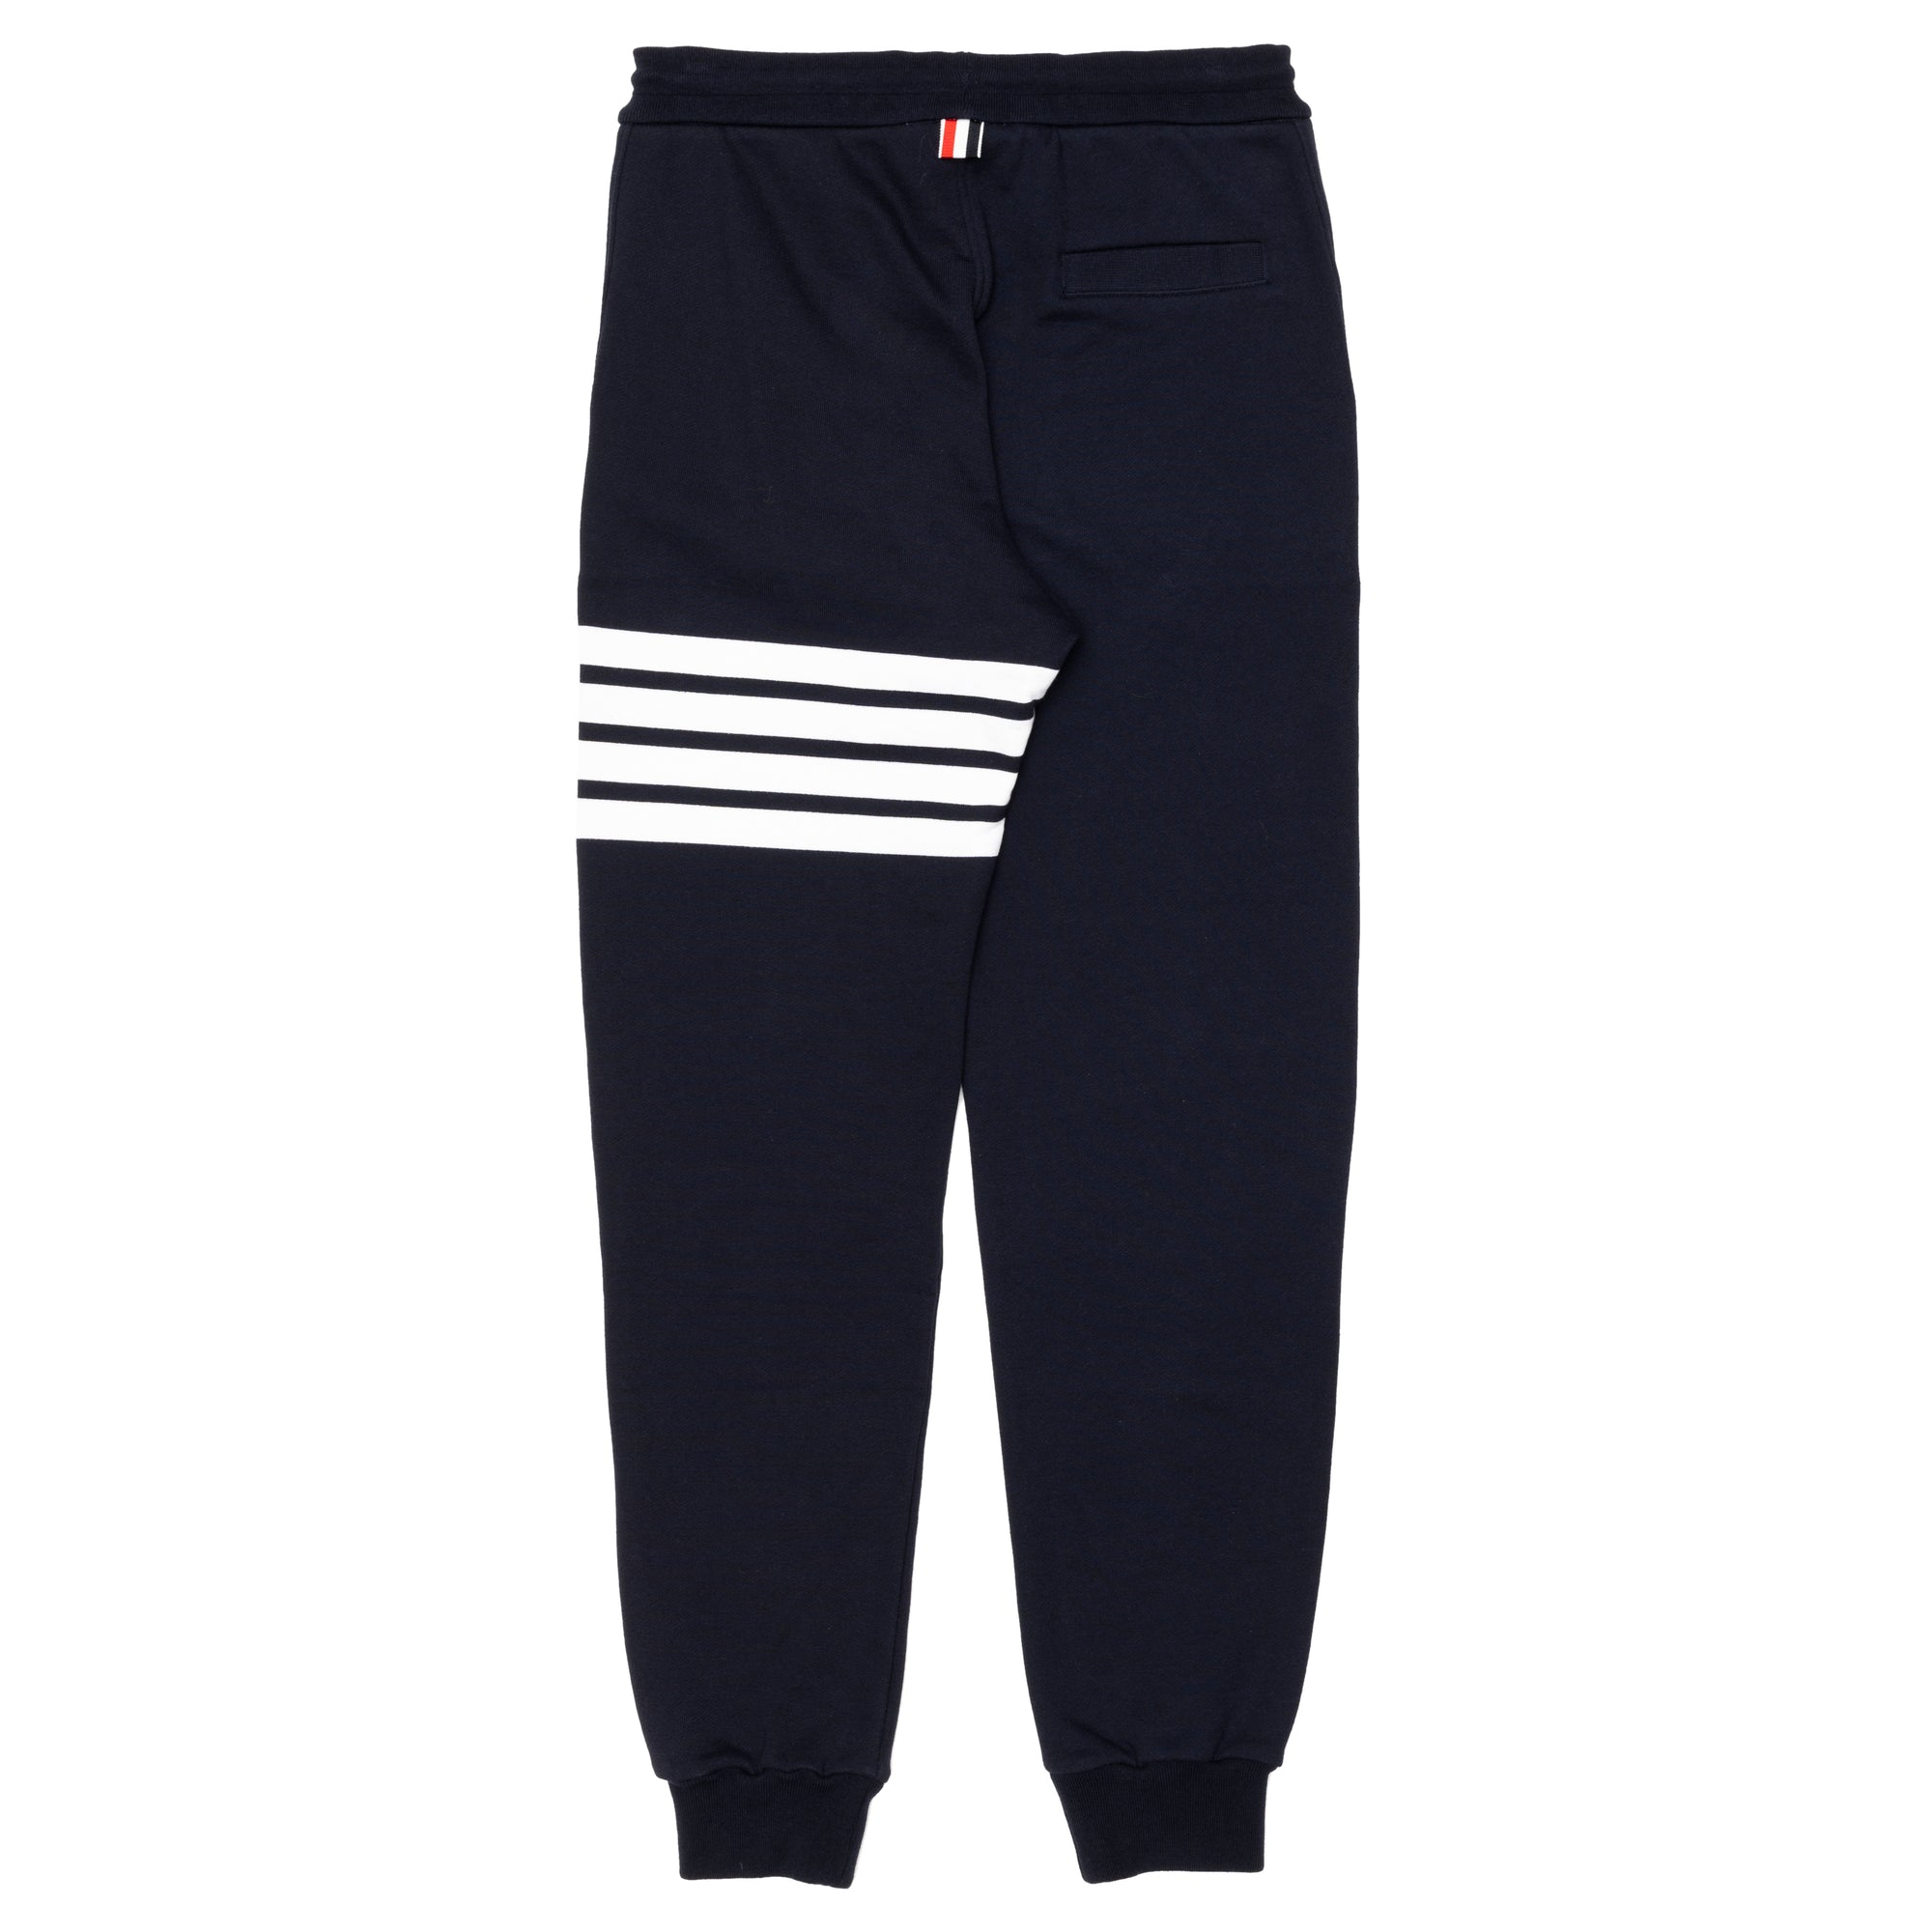 THOM BROWNE - MENS CLASSIC SWEATPANT WITH ENGINEE - NAVY - (MJQ008H-00535) view 2